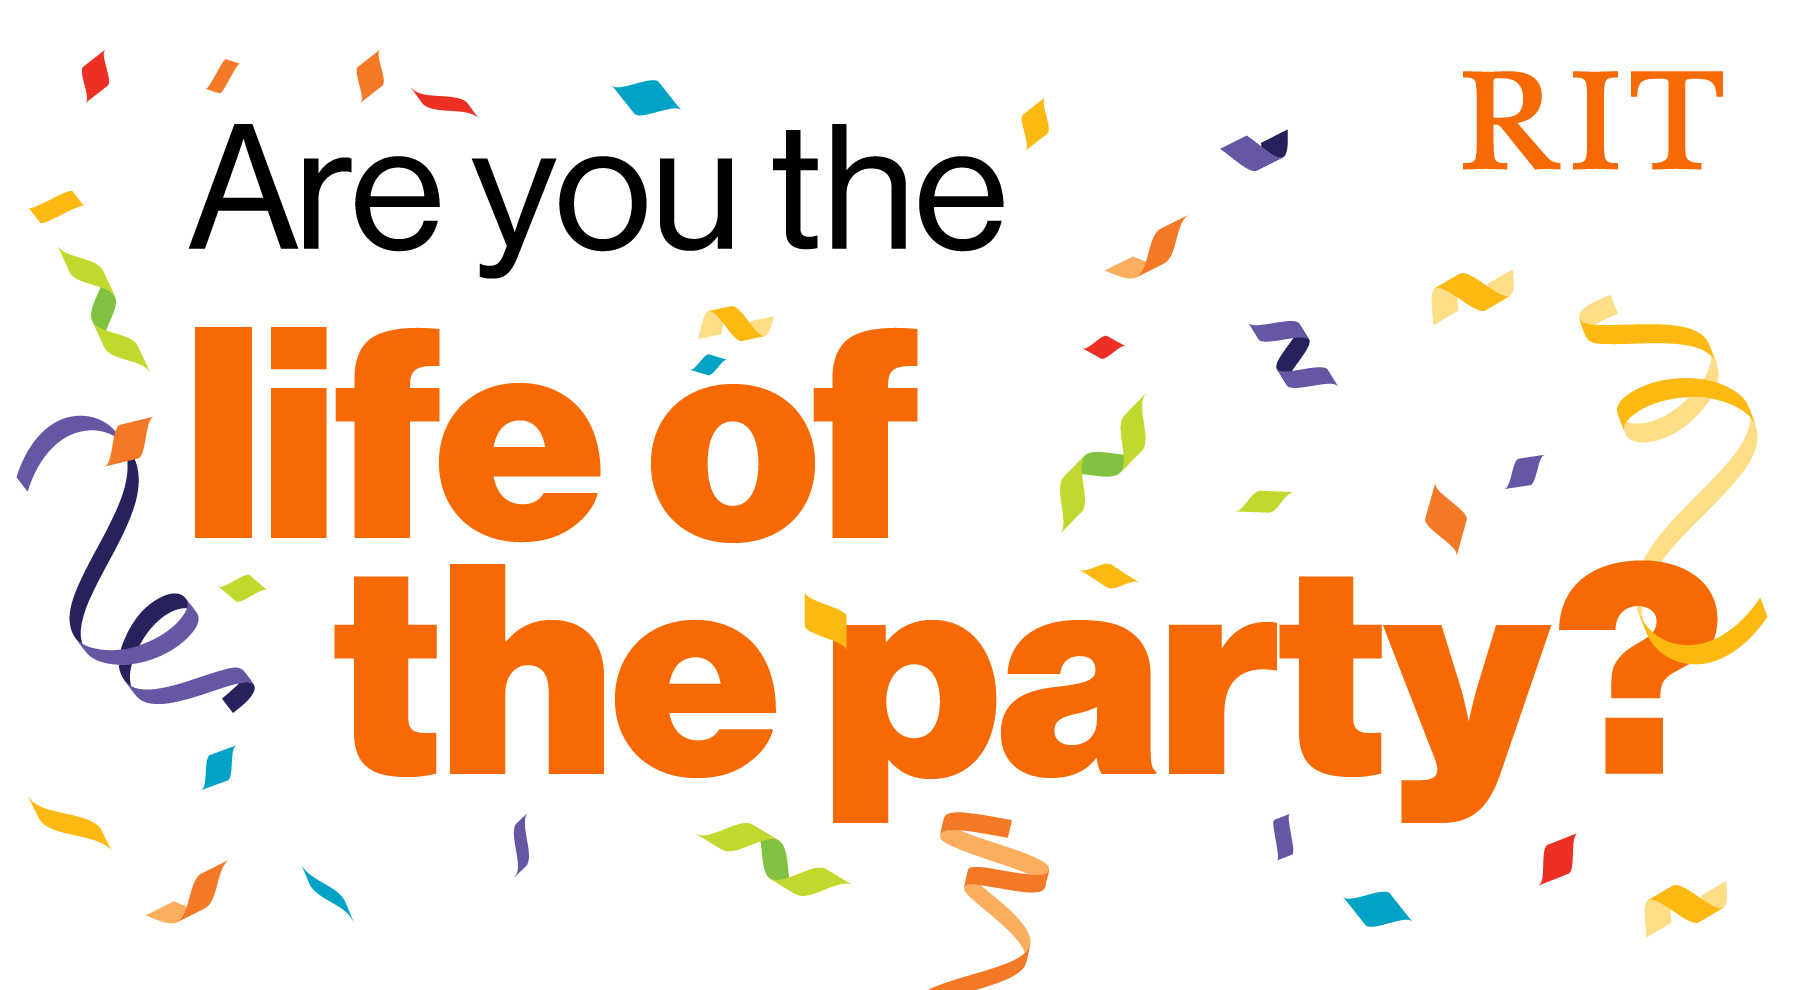 Poster with confetti, Are you the life of the party? written in orange text